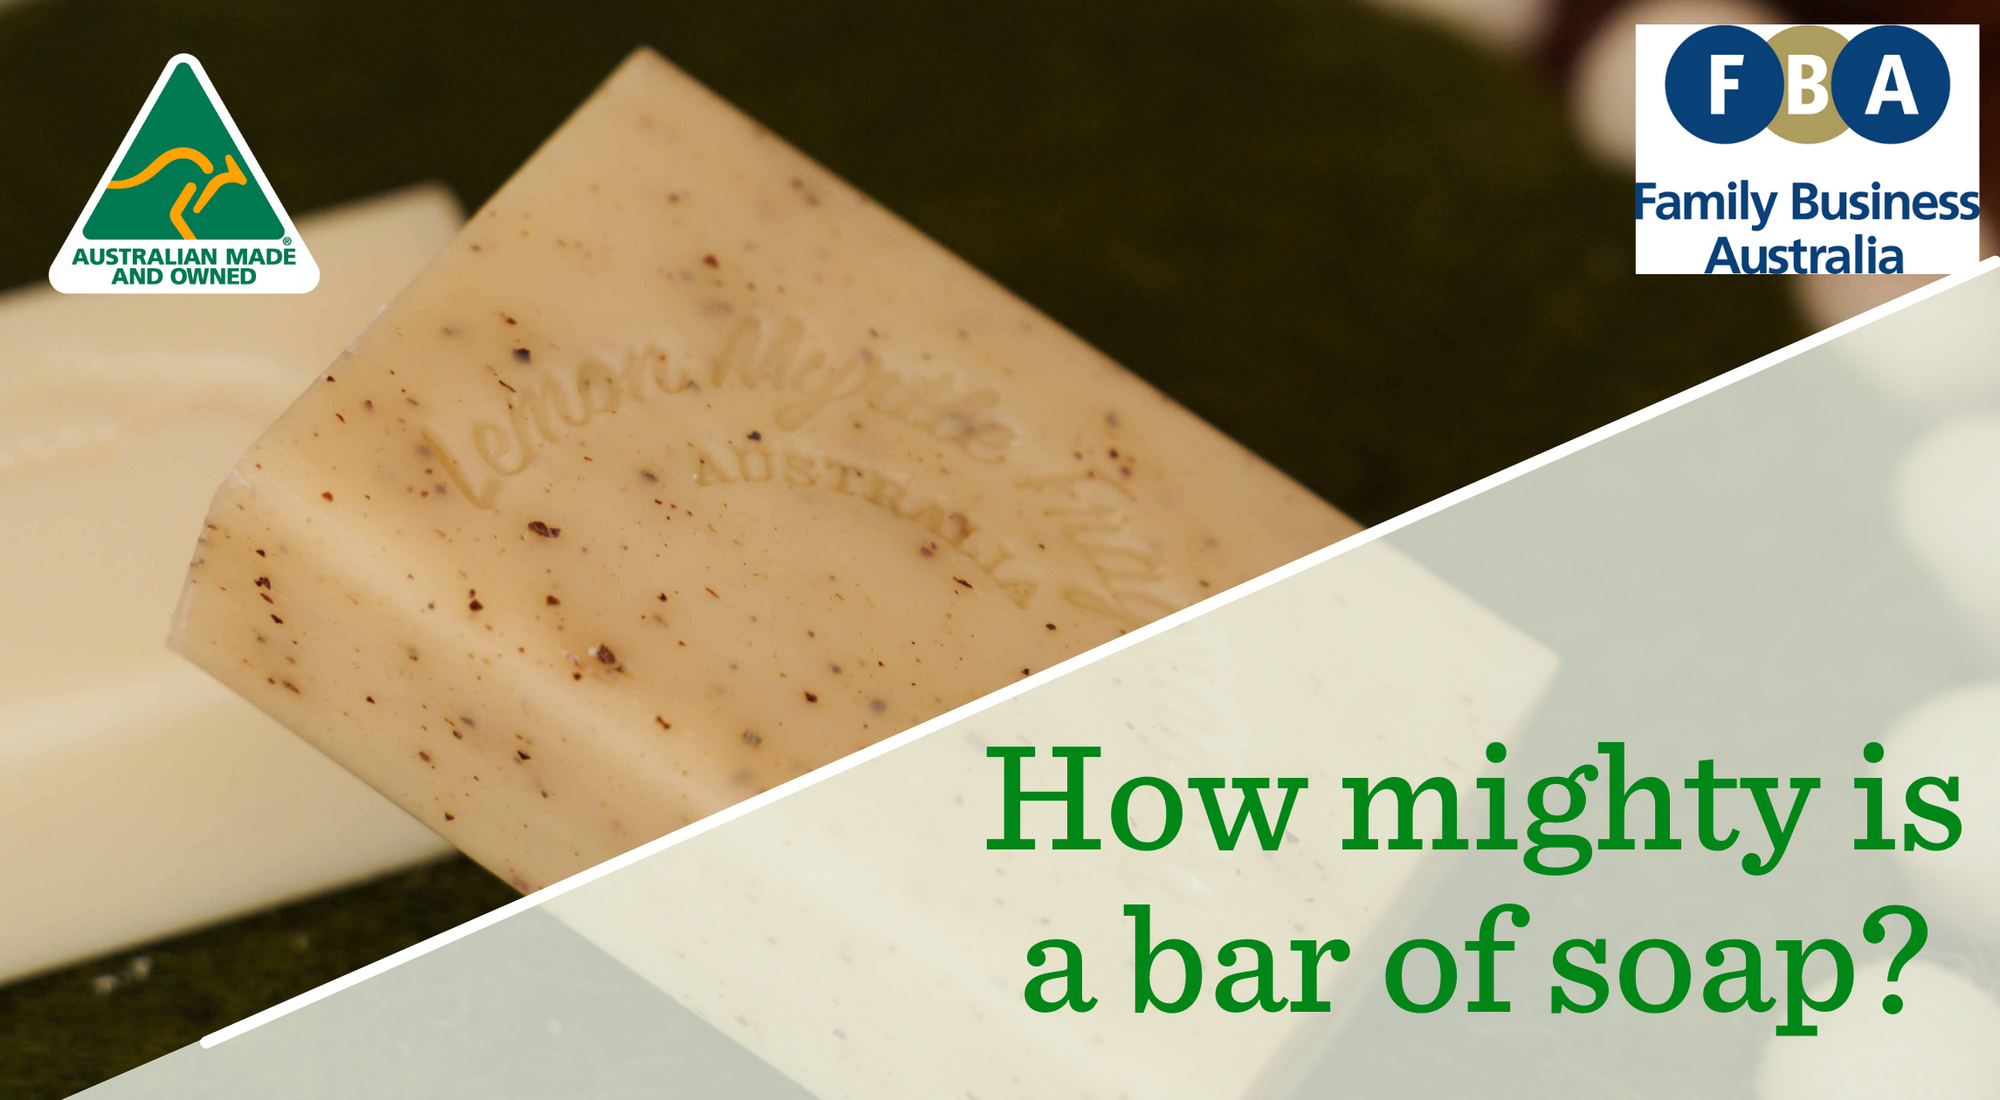 How mighty is a bar of soap?